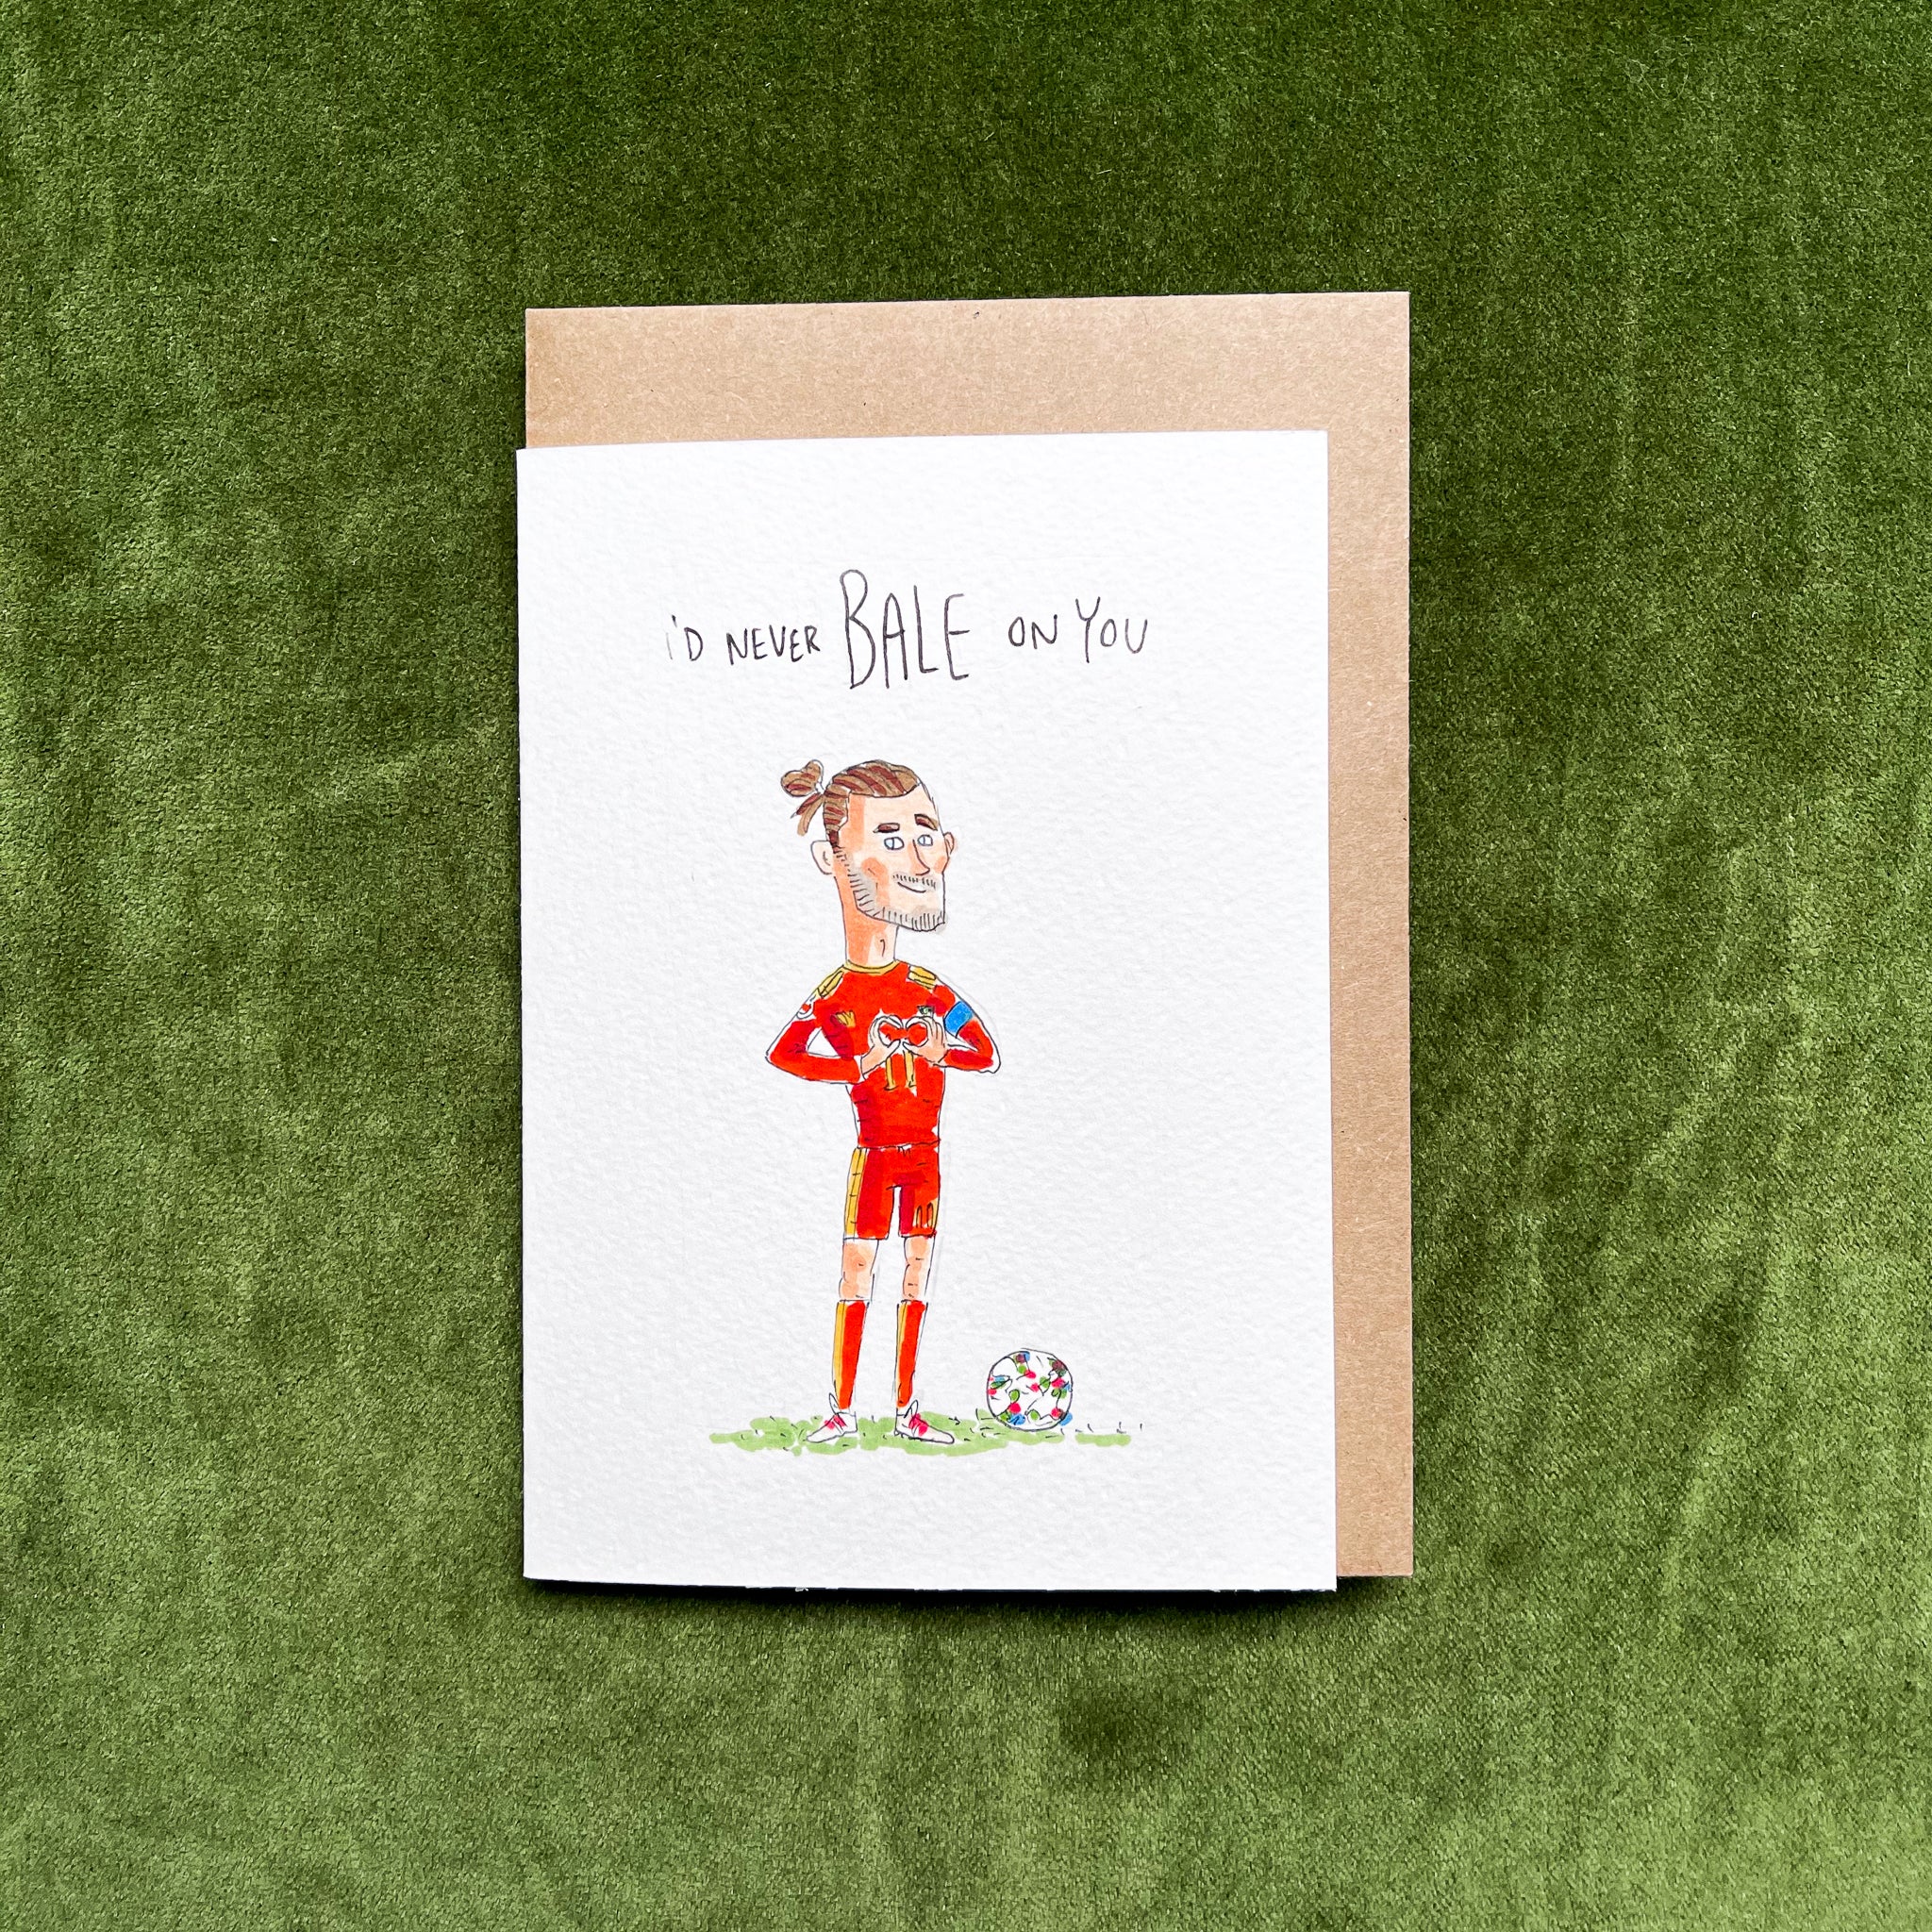 I'd Never Bale on You - Well Drawn